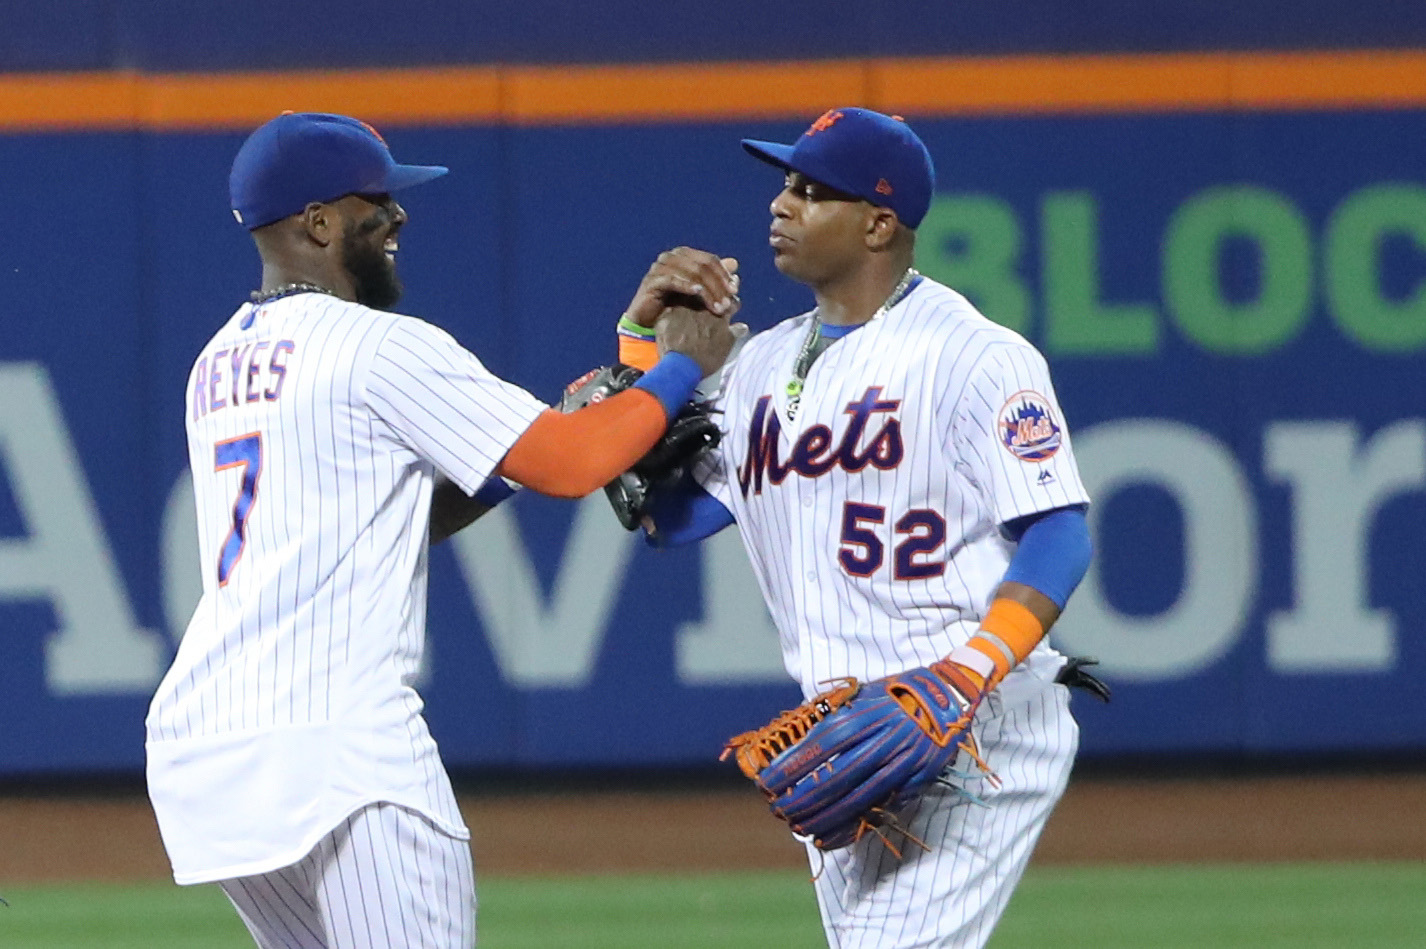 Jacob deGrom and New York Mets' Offense Dominate in Sound Victory (Highlights) 